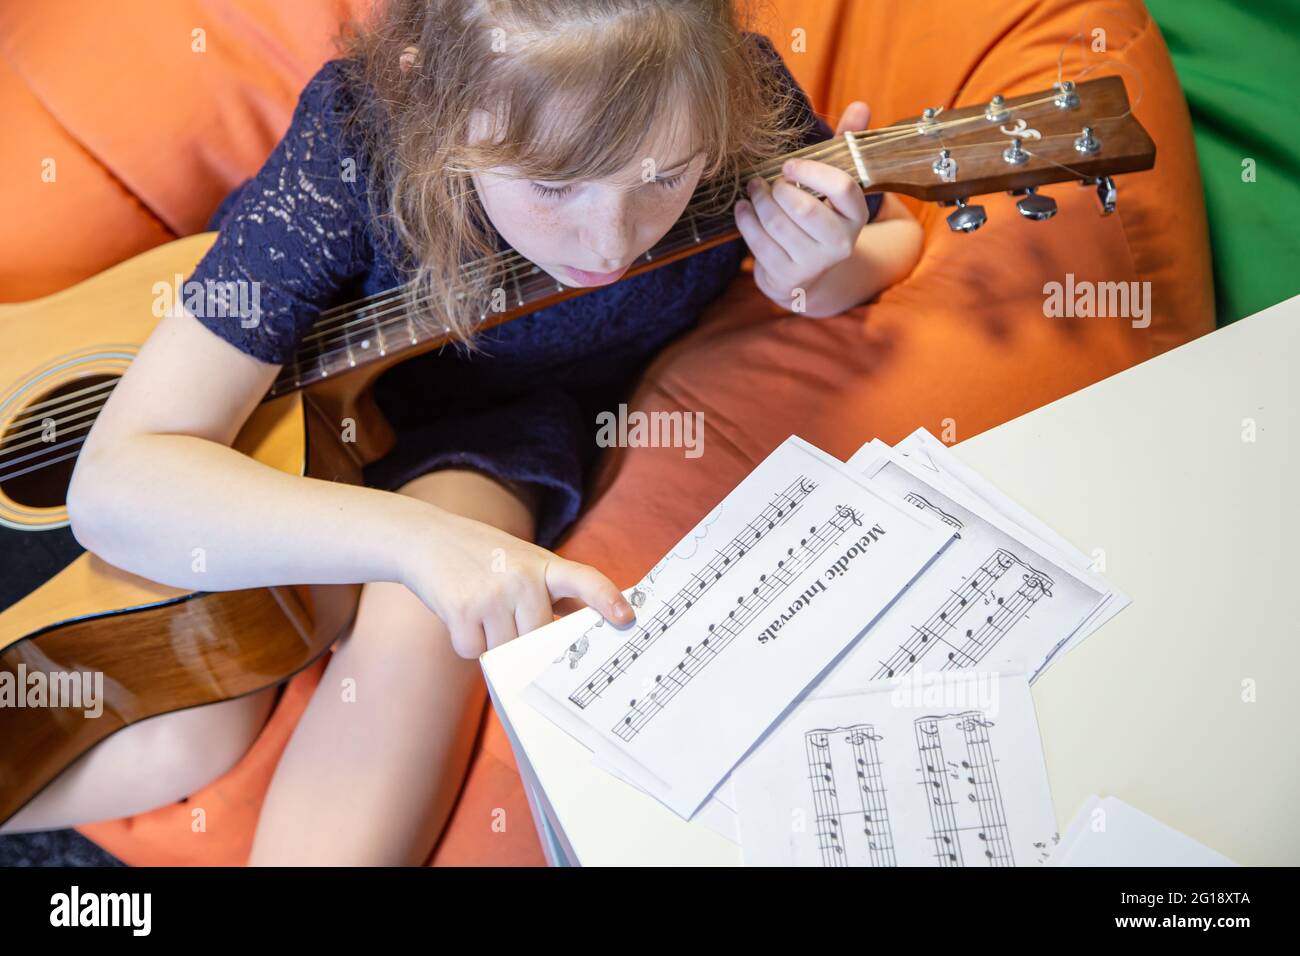 A little girl with a guitar learns solfeggio, sheet music and music theory. Stock Photo